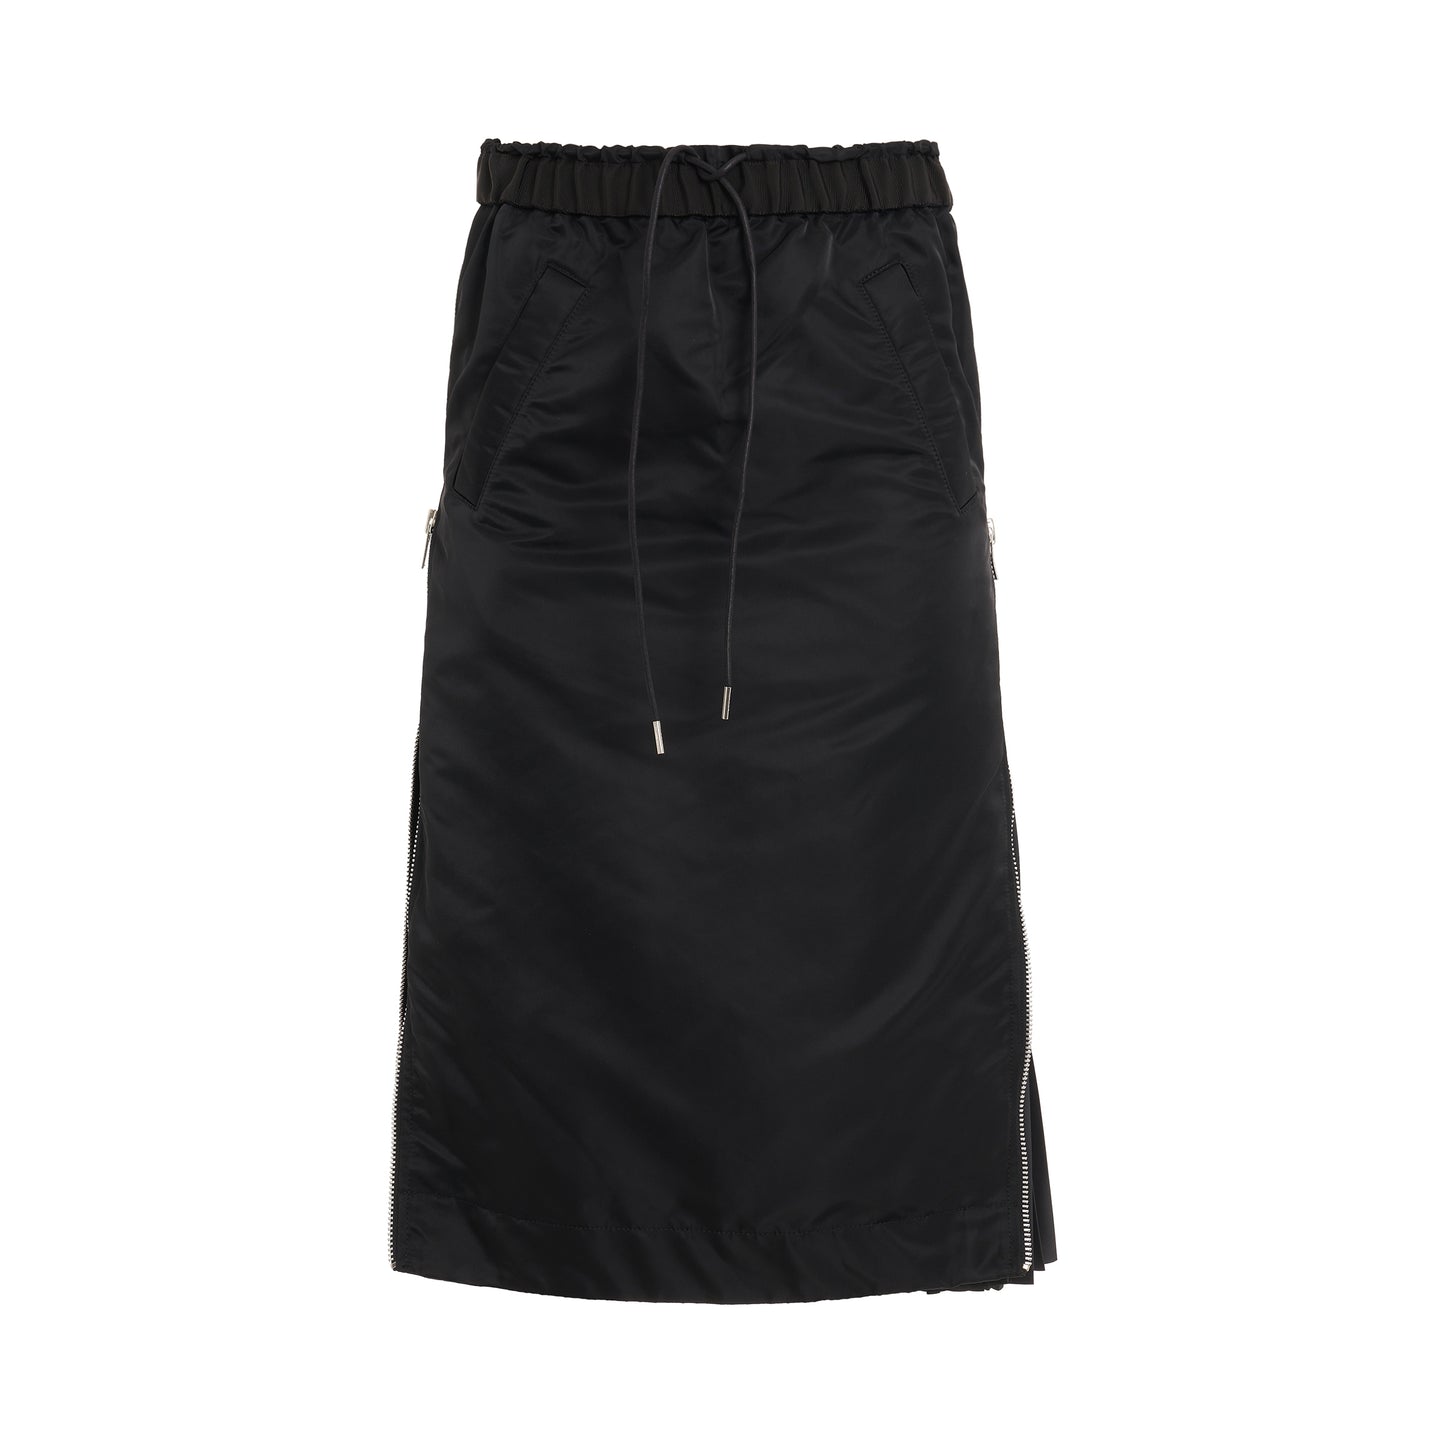 Nylon Twill Skirt with Side Zip Detail in Black